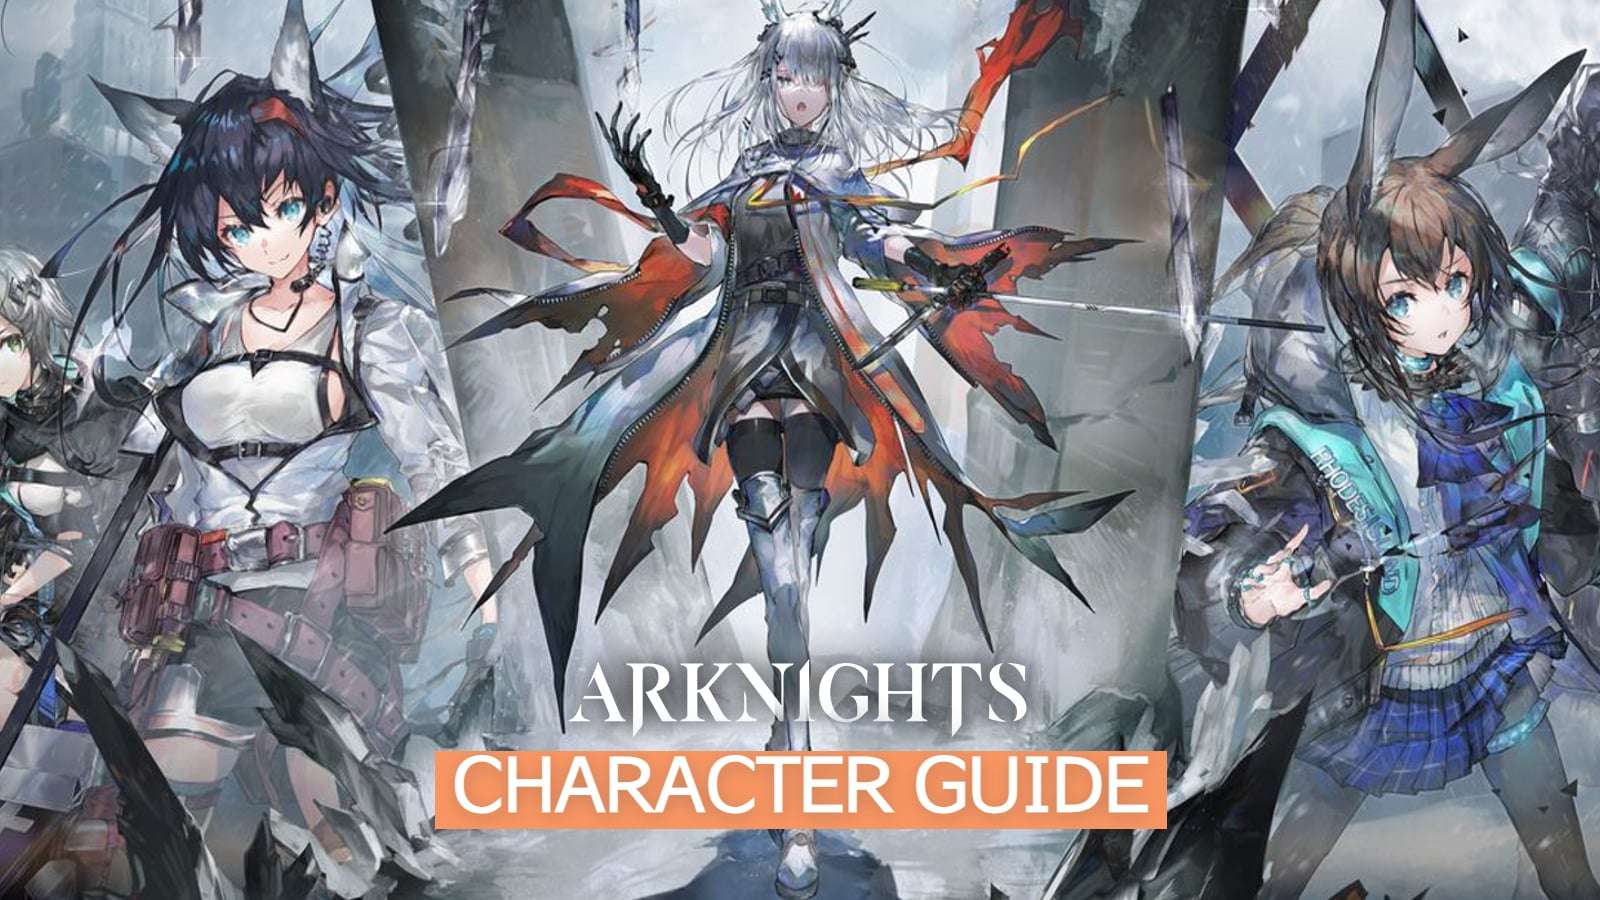 Arknights characters and rarities can be hard to keep up with